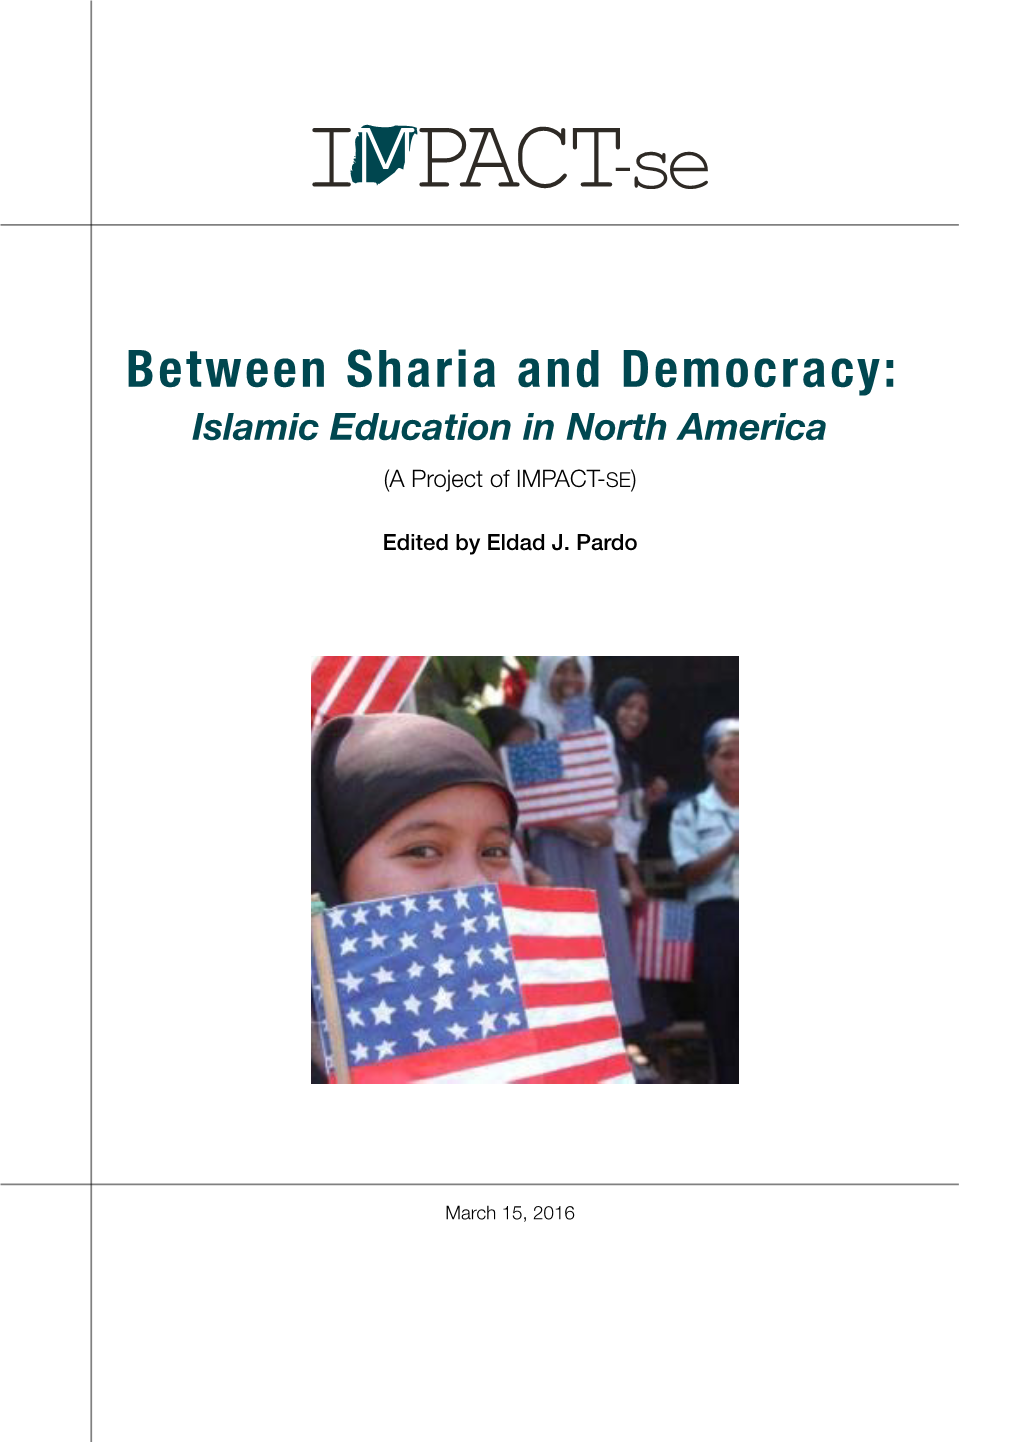 Between Sharia and Democracy: Islamic Education in North America (A Project of IMPACT-SE)